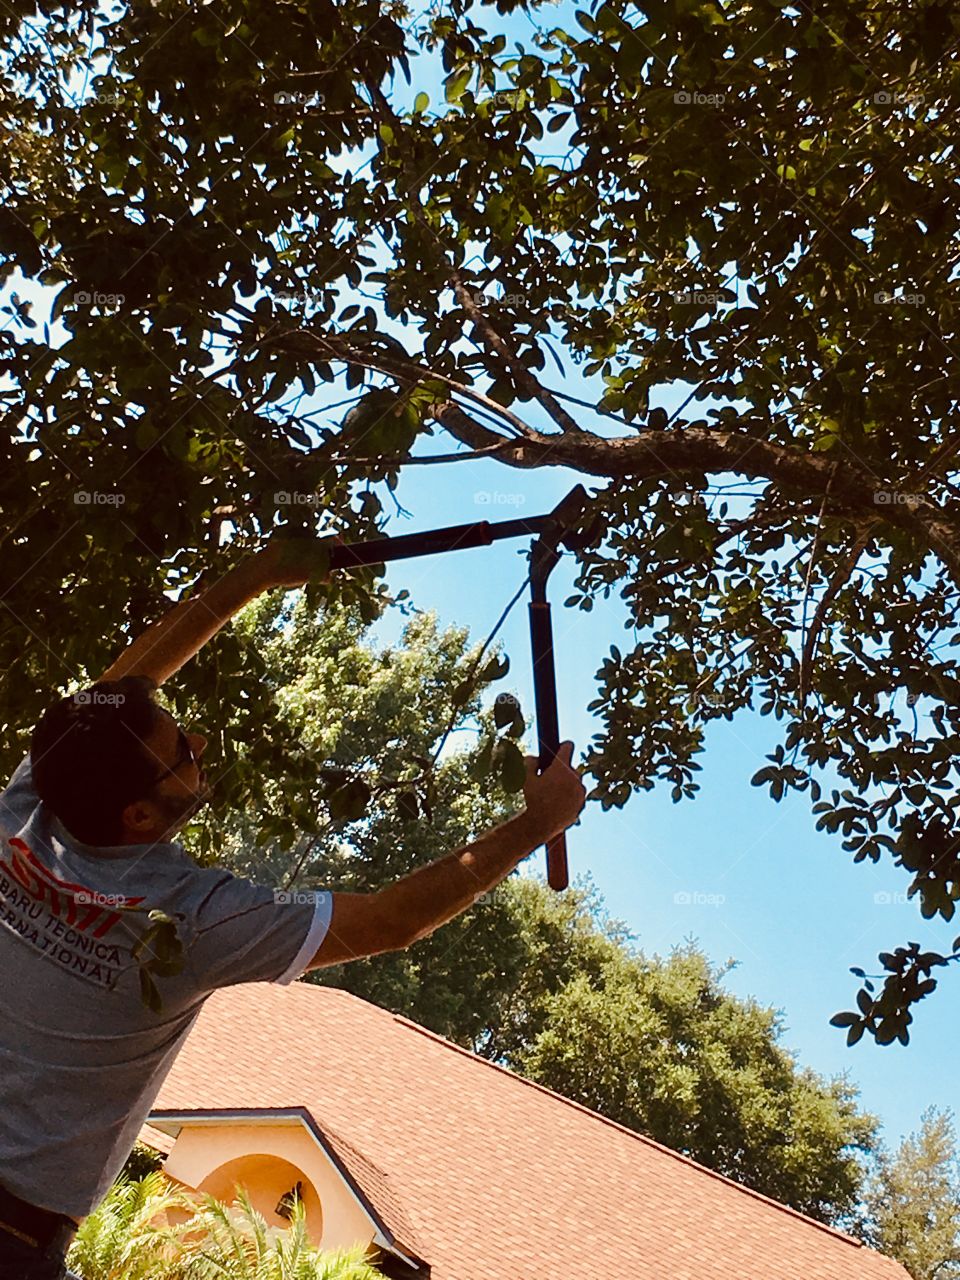 Staying in good shape by trimming the trees 